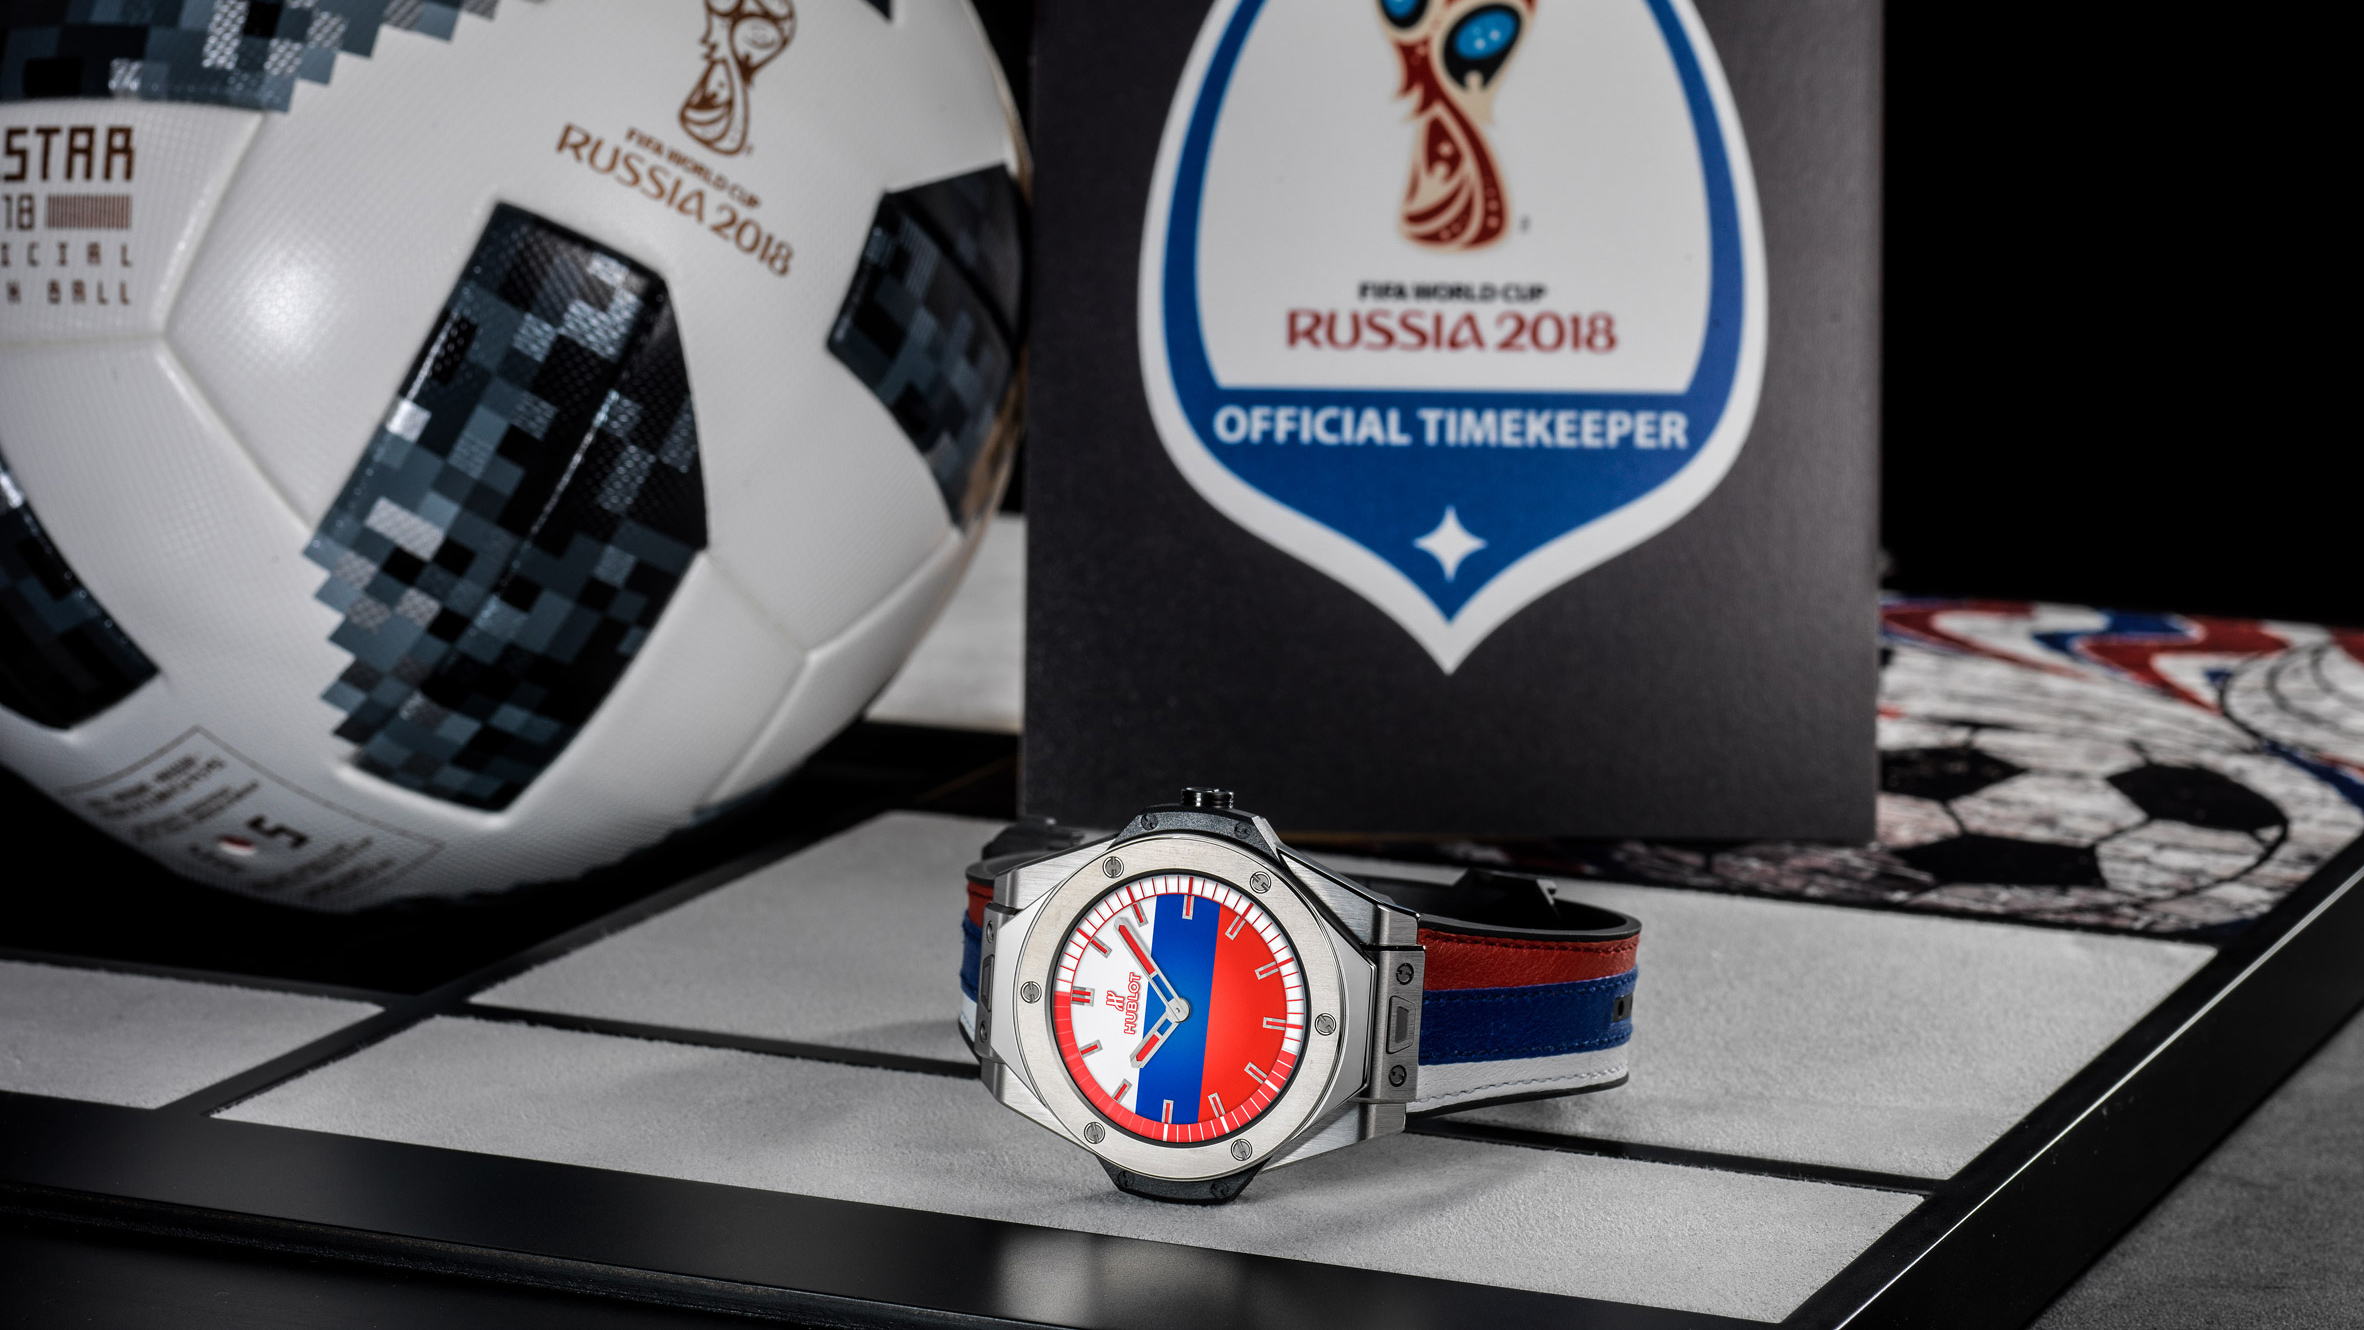 Big Bang E World Cup watch: For confirmed football and Hublot fans